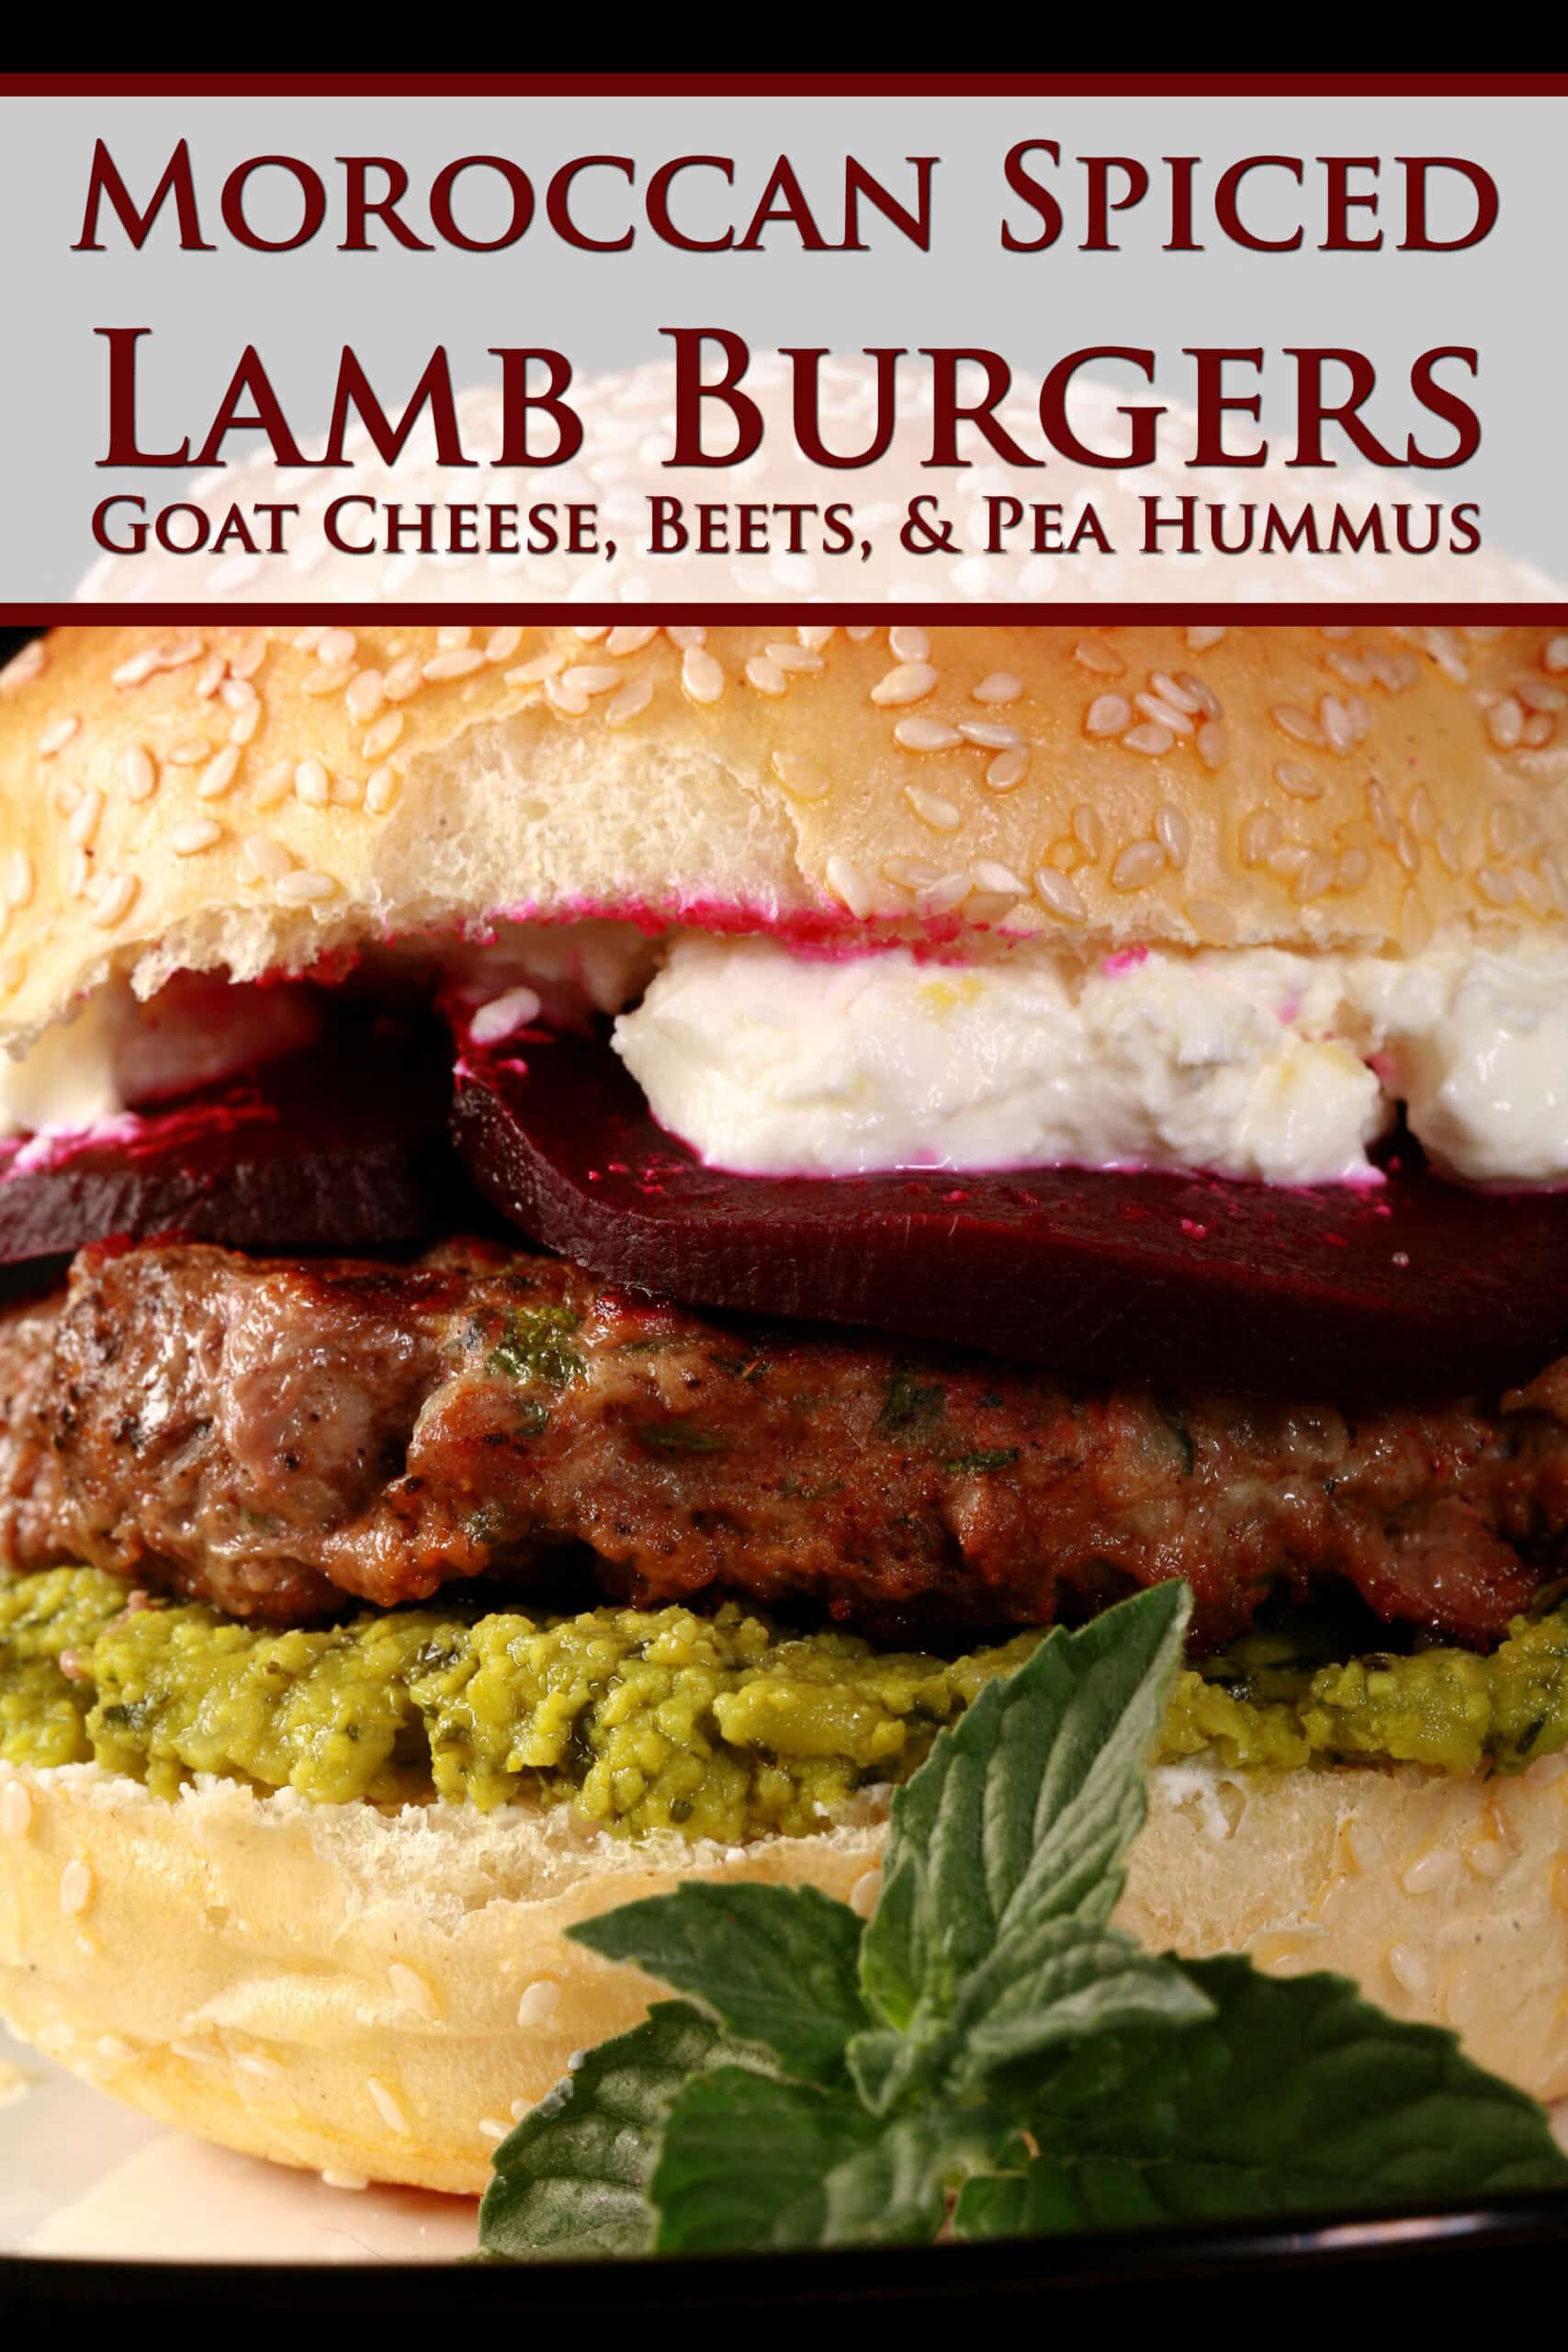 A fancy burger, with red text saying moroccan spiced lamb burgers with goat cheese, beets, and pea hummus.